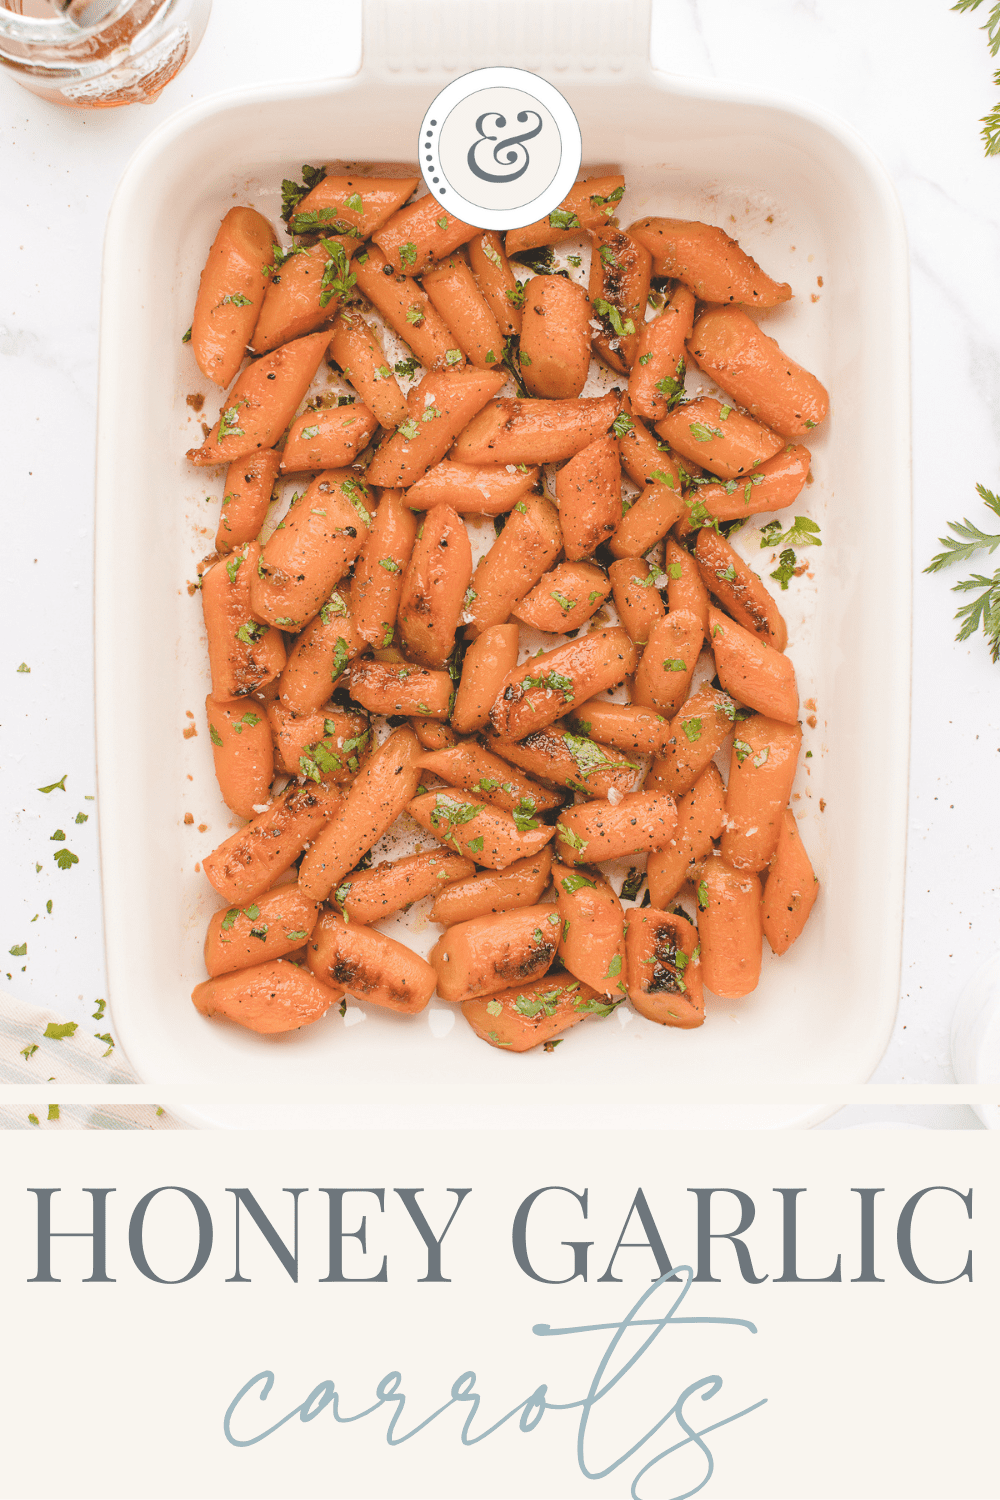 large white platter of finished roasted carrots with honey garlic butter sauce.